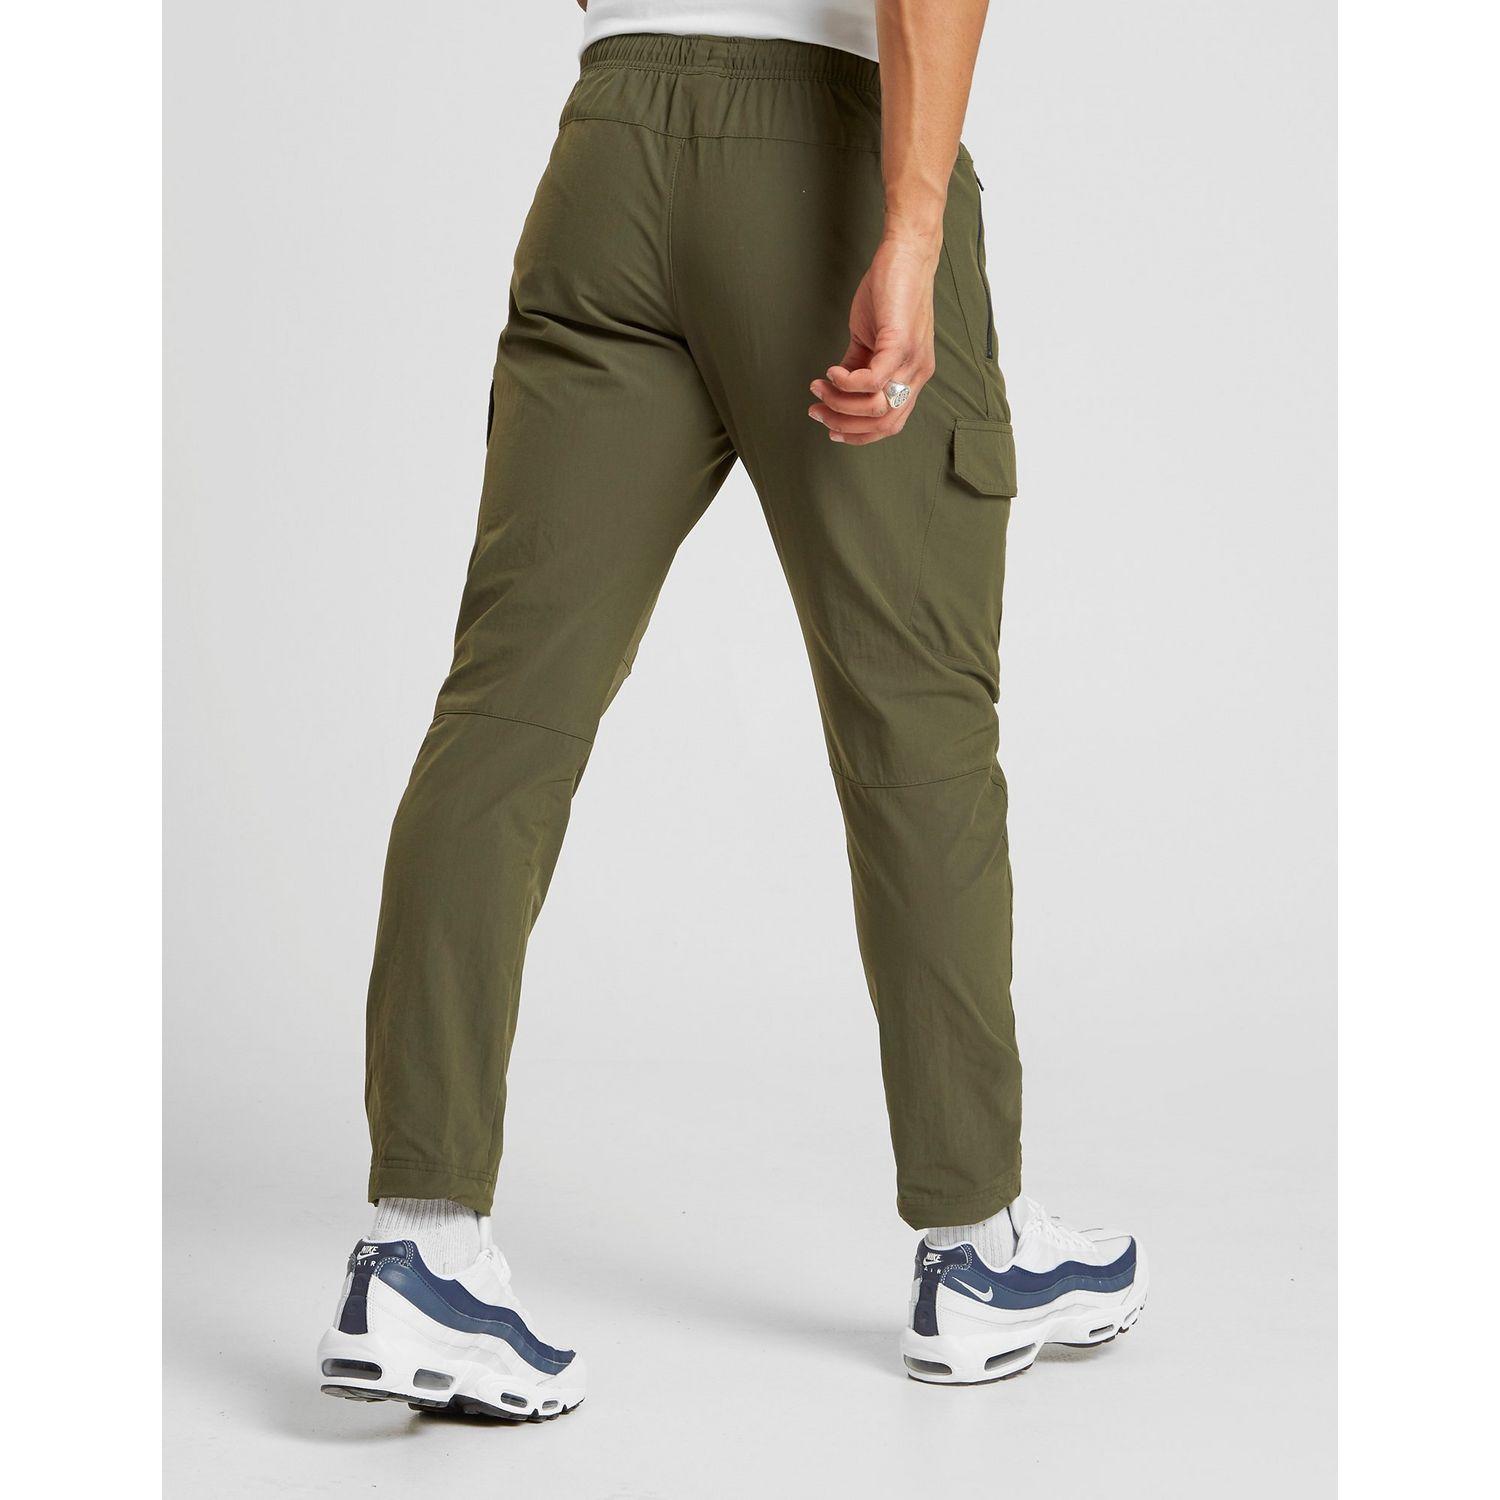 Nike Cotton Air Max Cargo Track Pants in Green for Men - Lyst